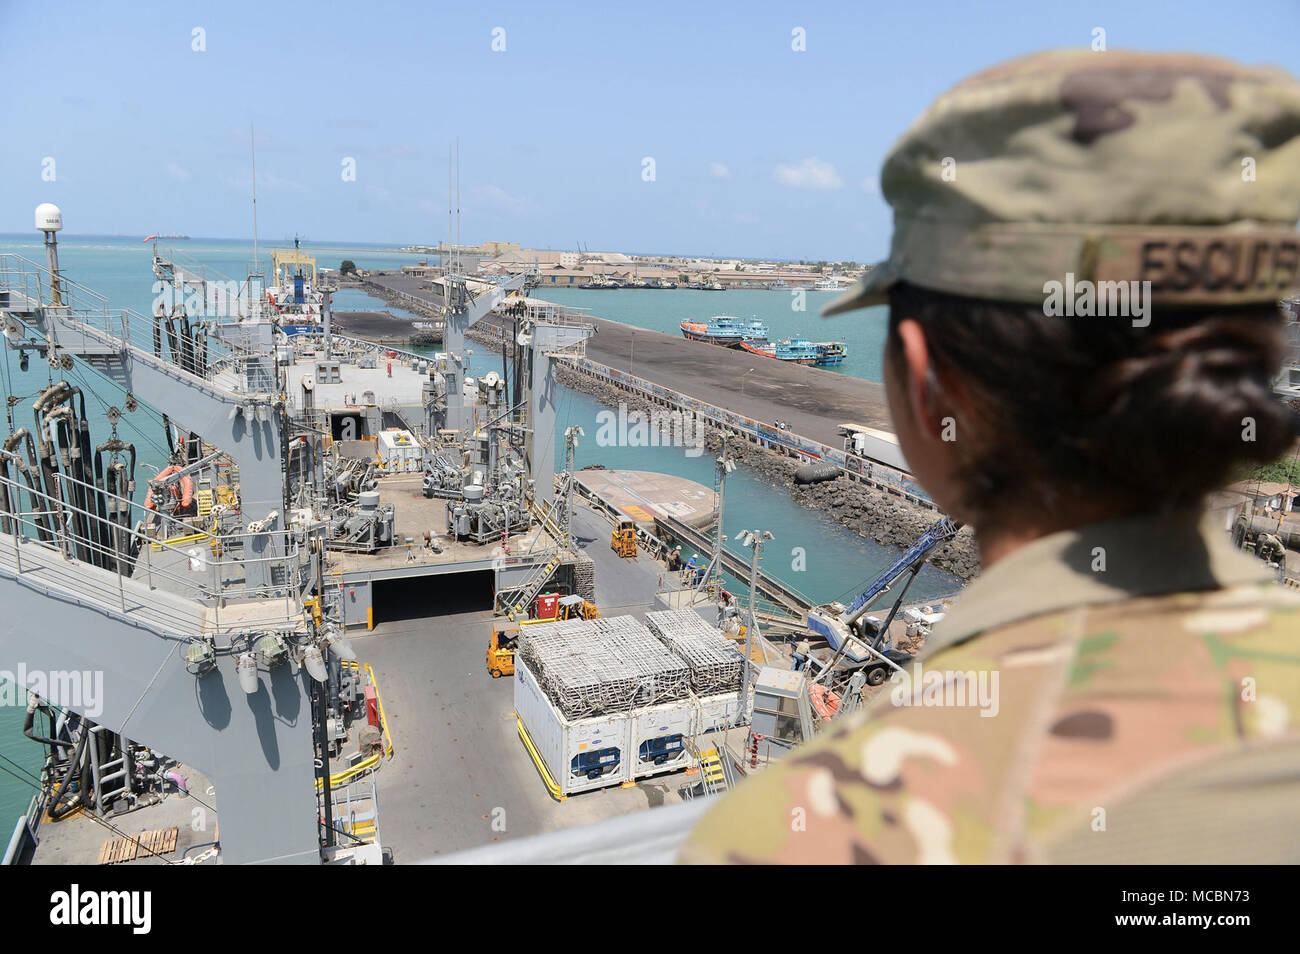 PORT OF DJIBOUTI, Djibouti –Soldiers assigned to the 3-144 Infantry Regiment tour the USNS John Lenthall (T-AO-189) during cargo replenishment operations with the Camp Lemonnier Supply Department, Mar. 26, 2018. Lenthall is a Henry J. Kaiser-class fleet replenishment oiler of the United States Navy. Her motto is 'Shaft of the Spear.' NAVSUP FLC Sigonella stands ready to fulfill logistic responsibilities and serves as a vital link to enable mission success across Europe and Africa. NAVSUP FLC Sigonella is one of eight fleet logistics centers under NAVSUP, which provides global logistics, busine Stock Photo